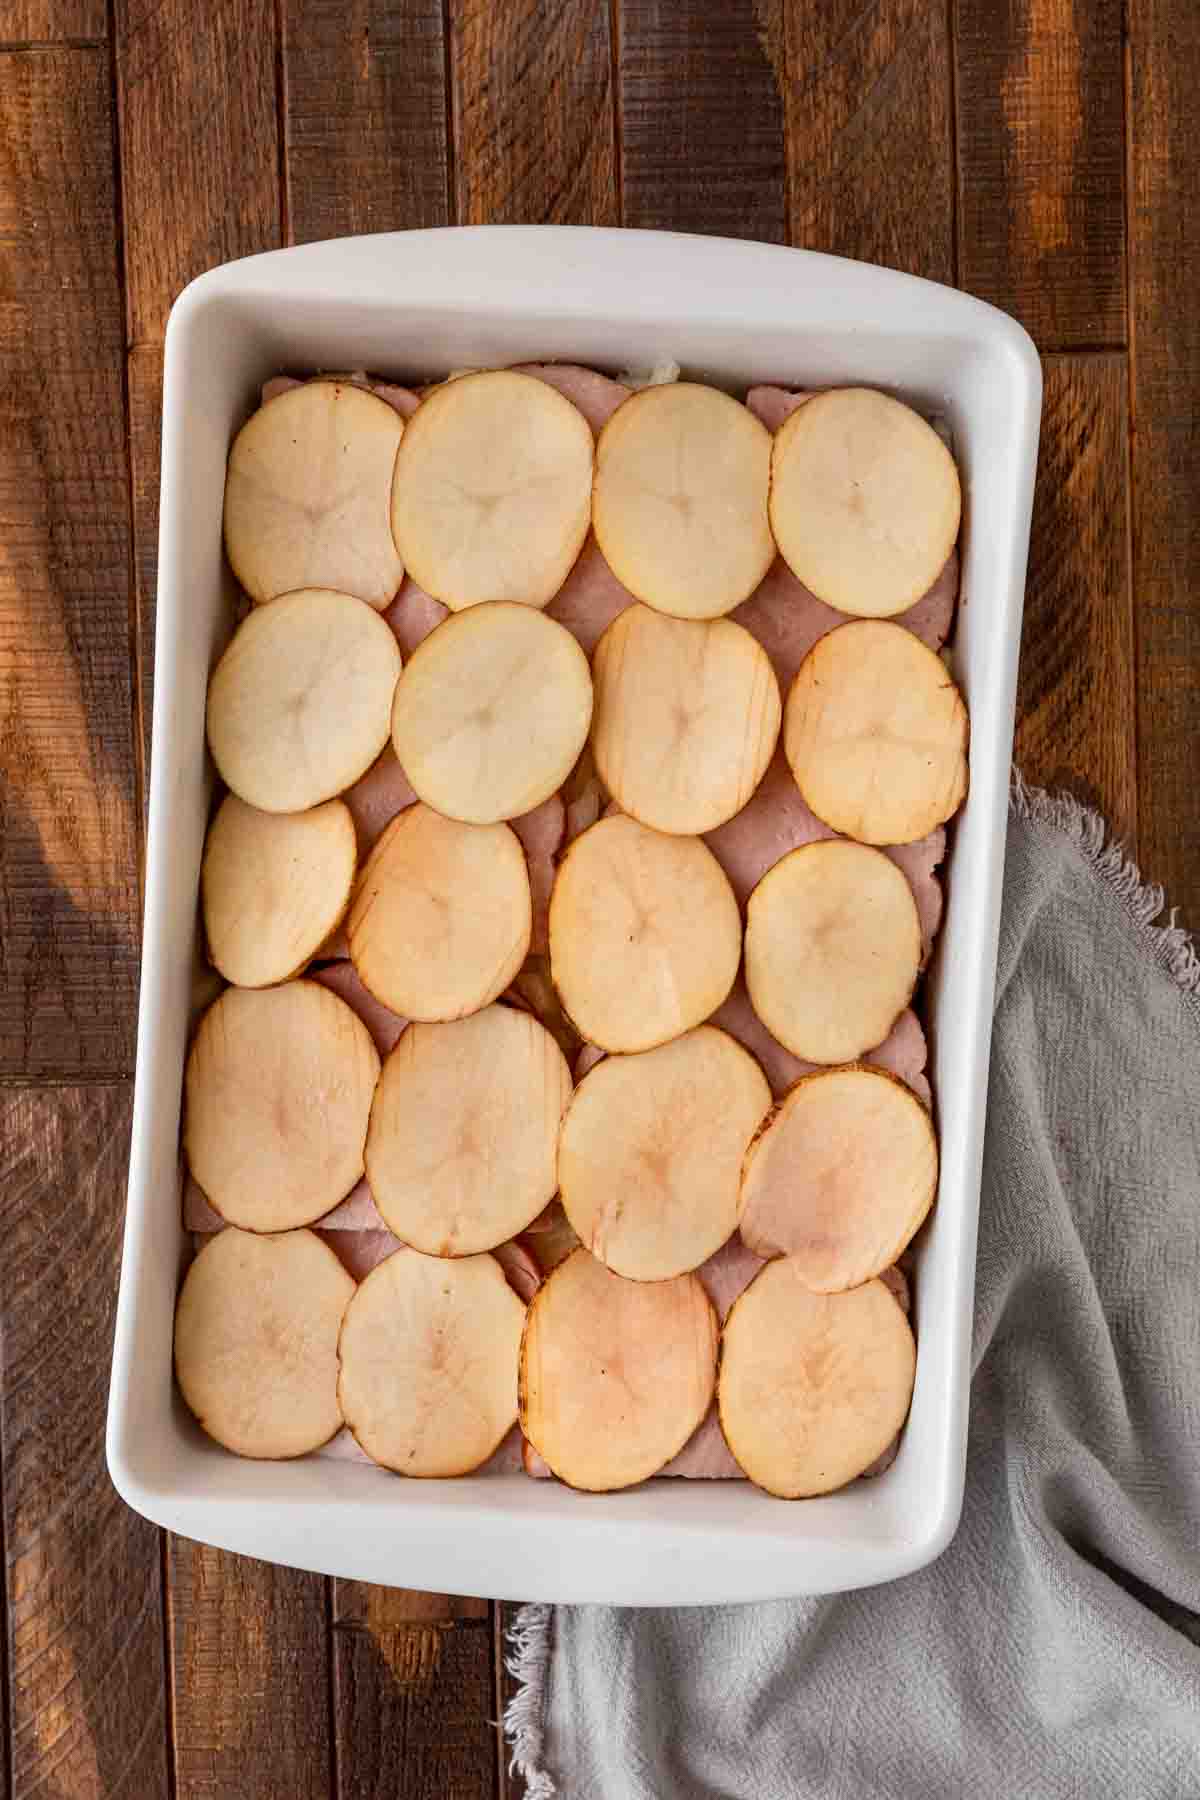 Scalloped Potatoes and Ham layer of potatoes added in baking dish